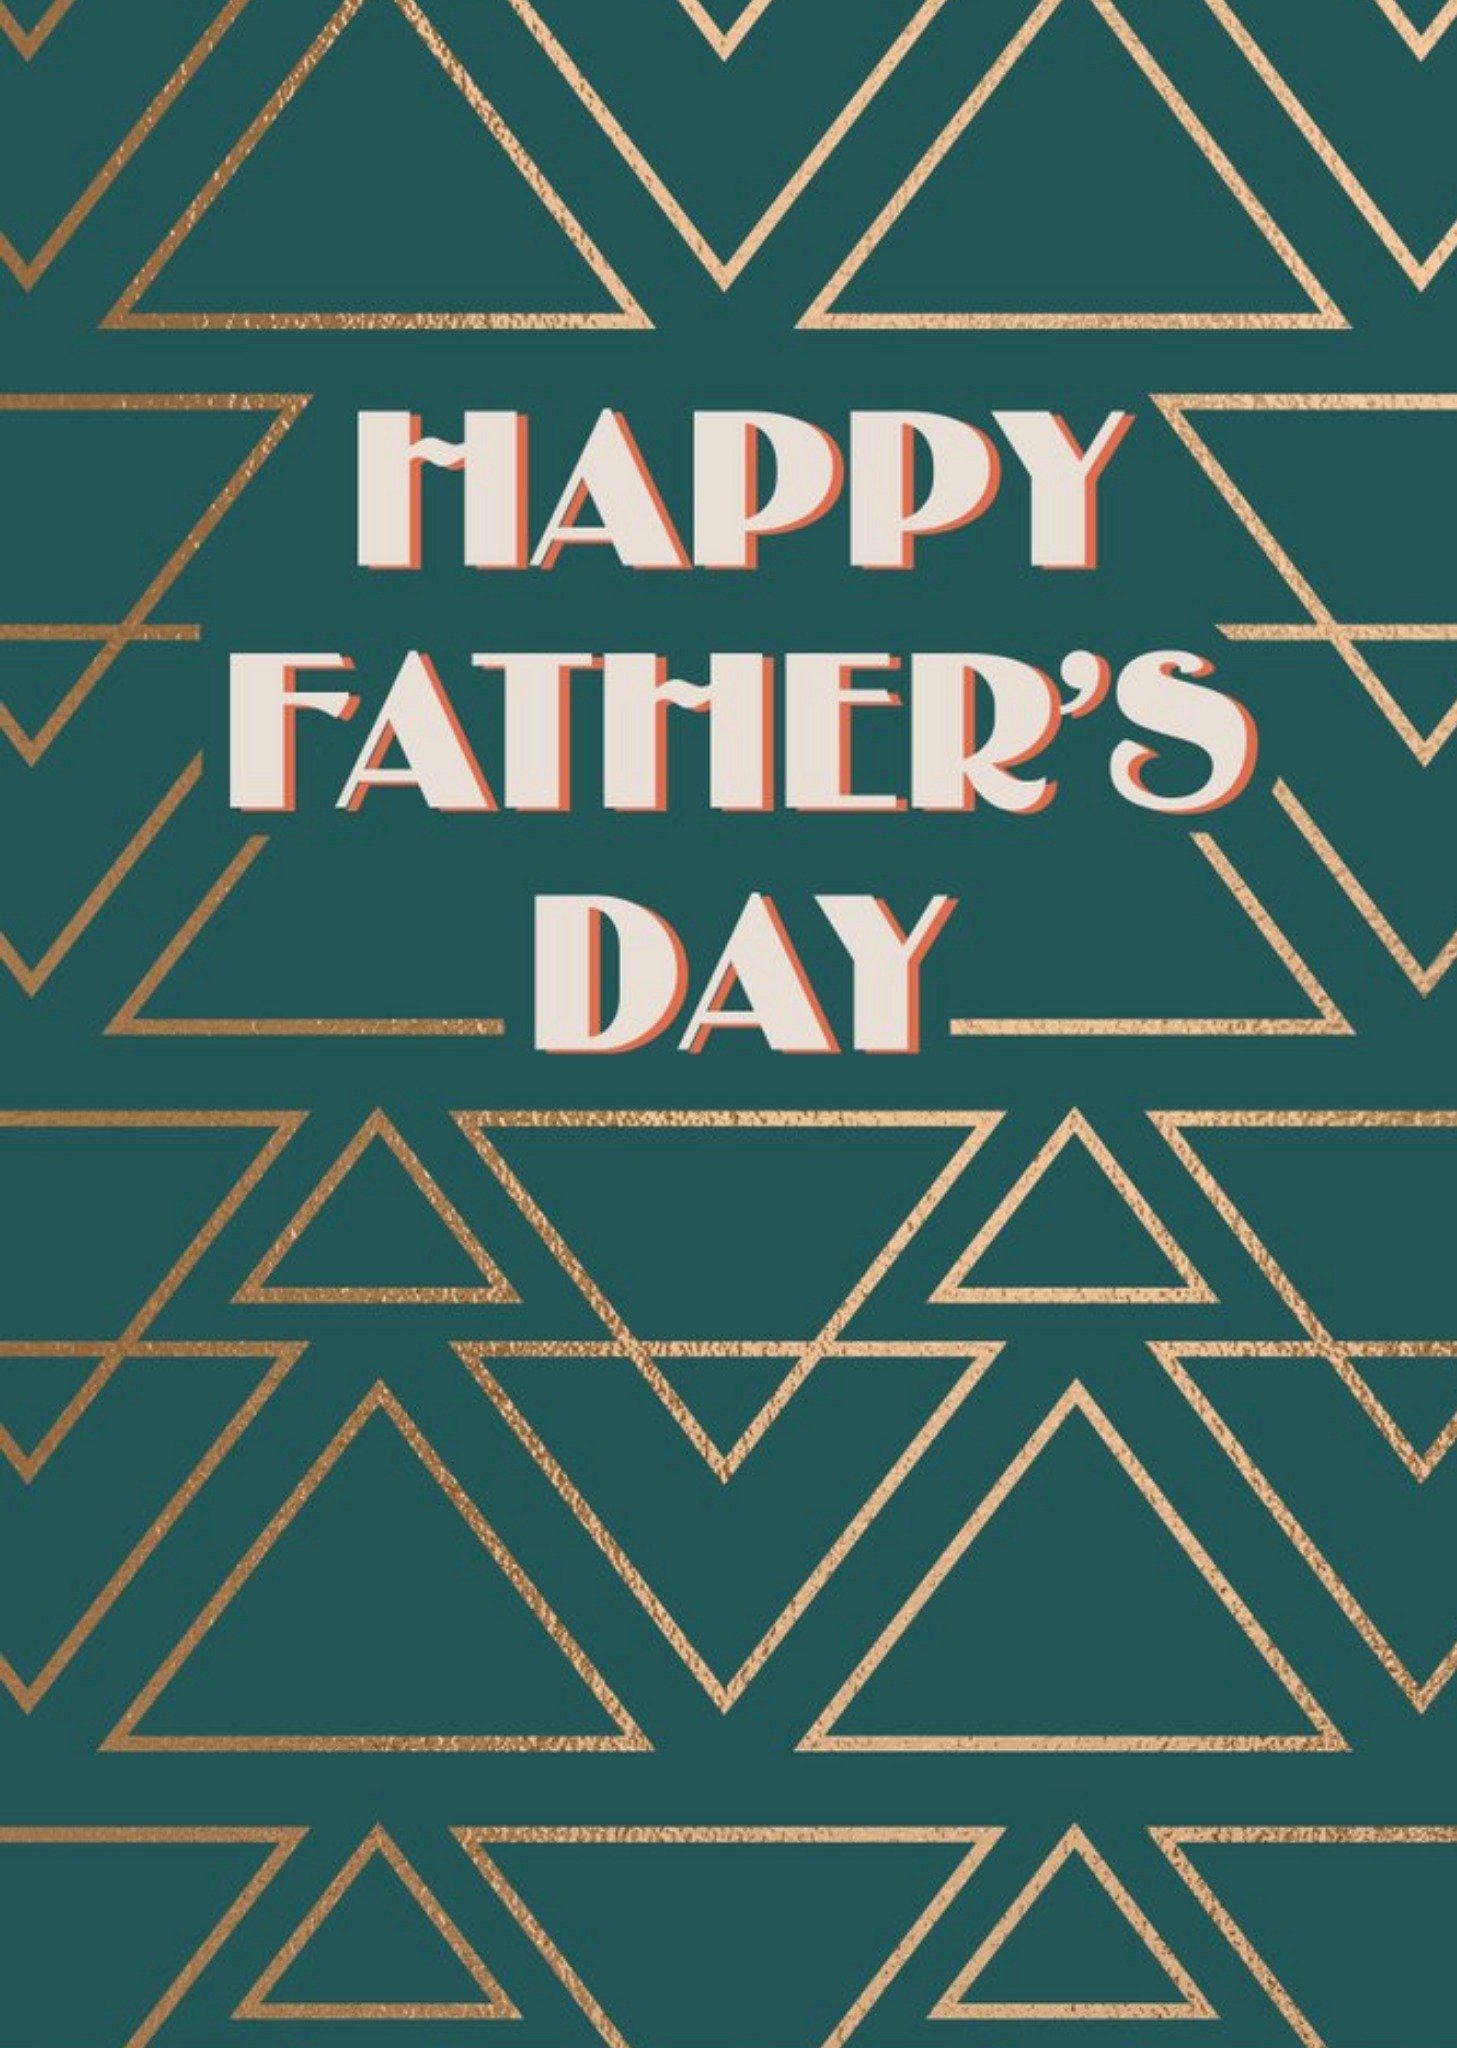 Moonpig Art Deco Gold Pattern Happy Father's Day Card, Large